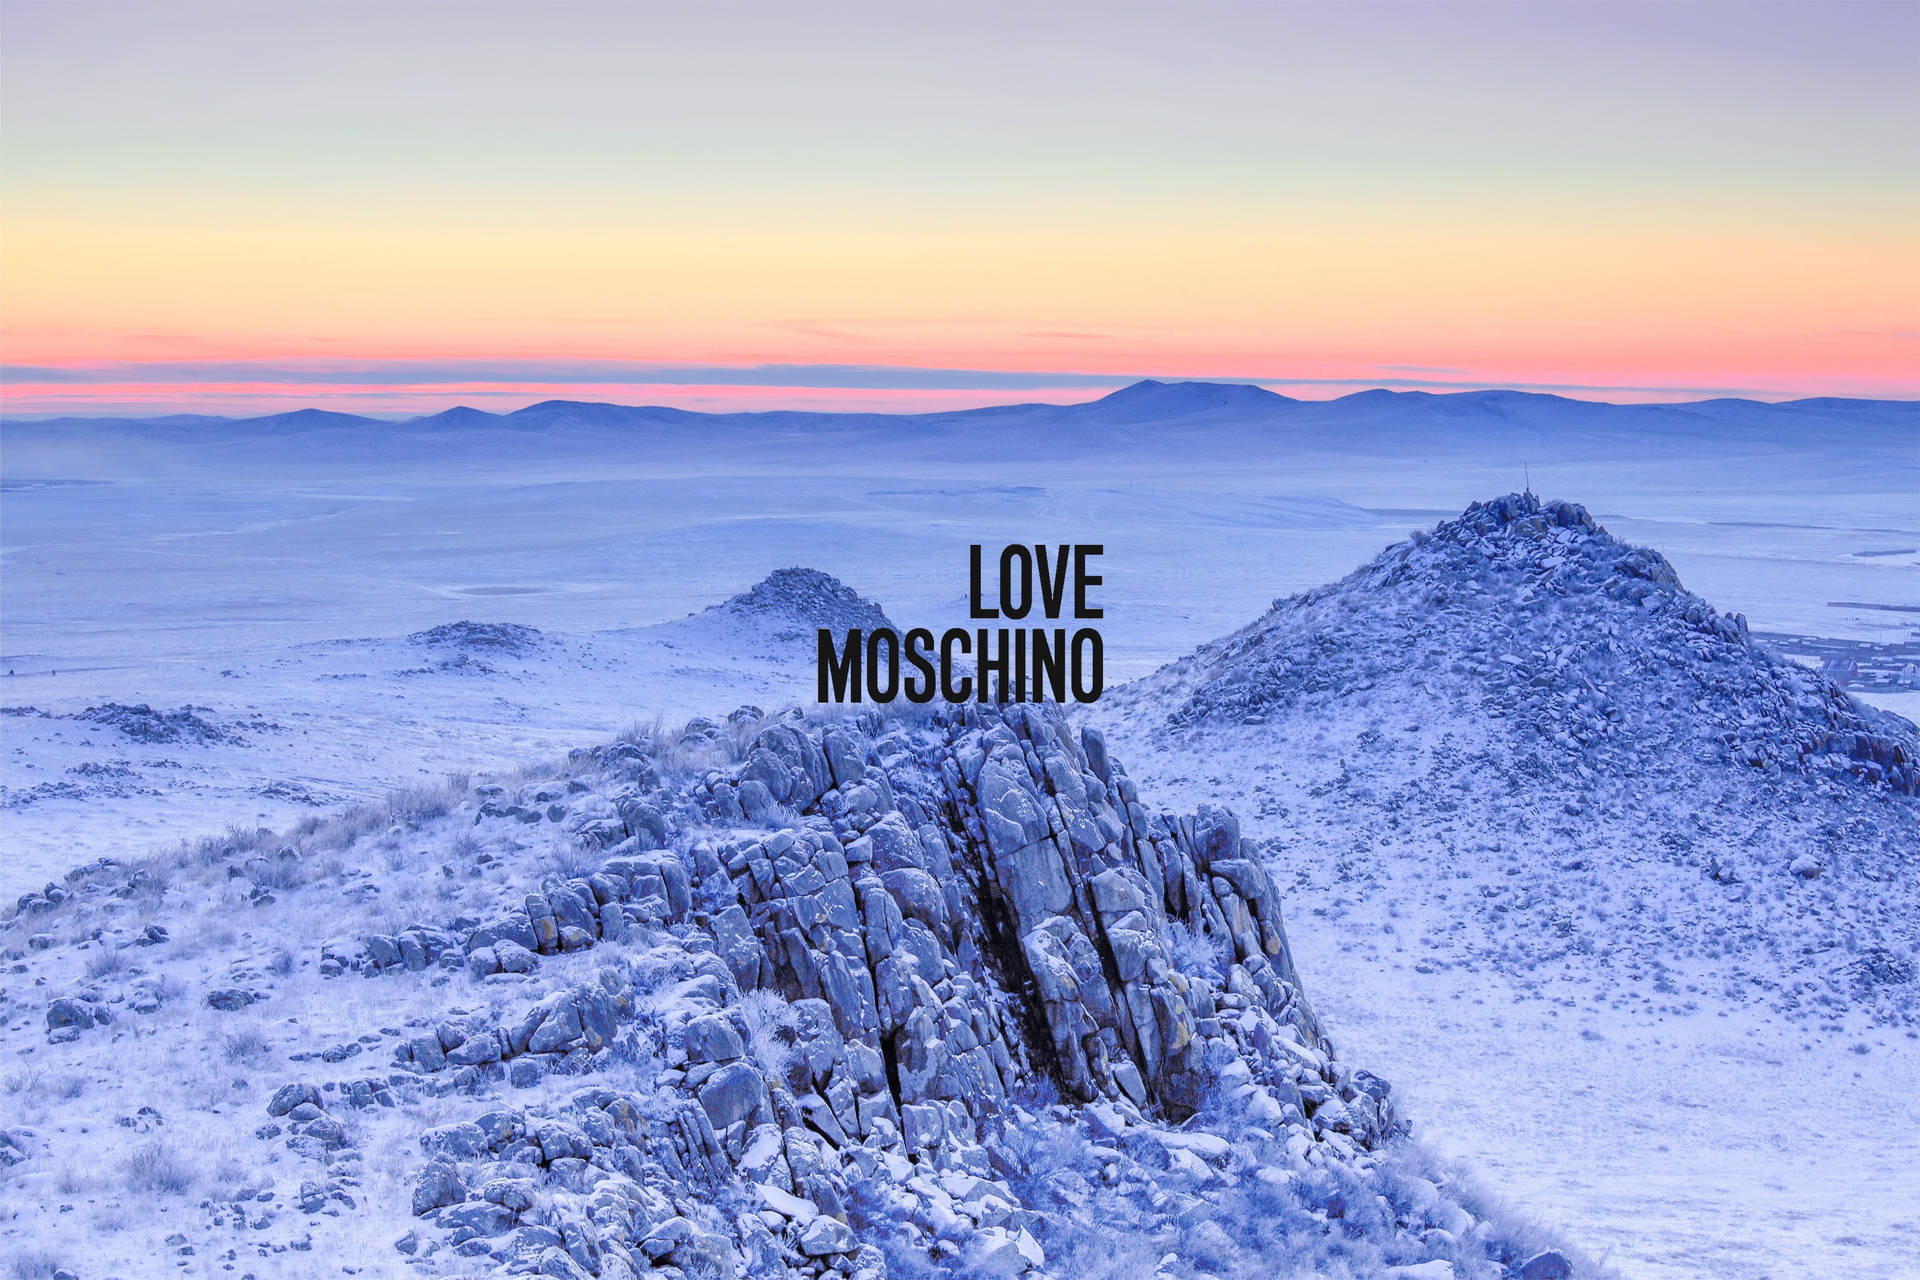 Love Moschino Snowy Mountains